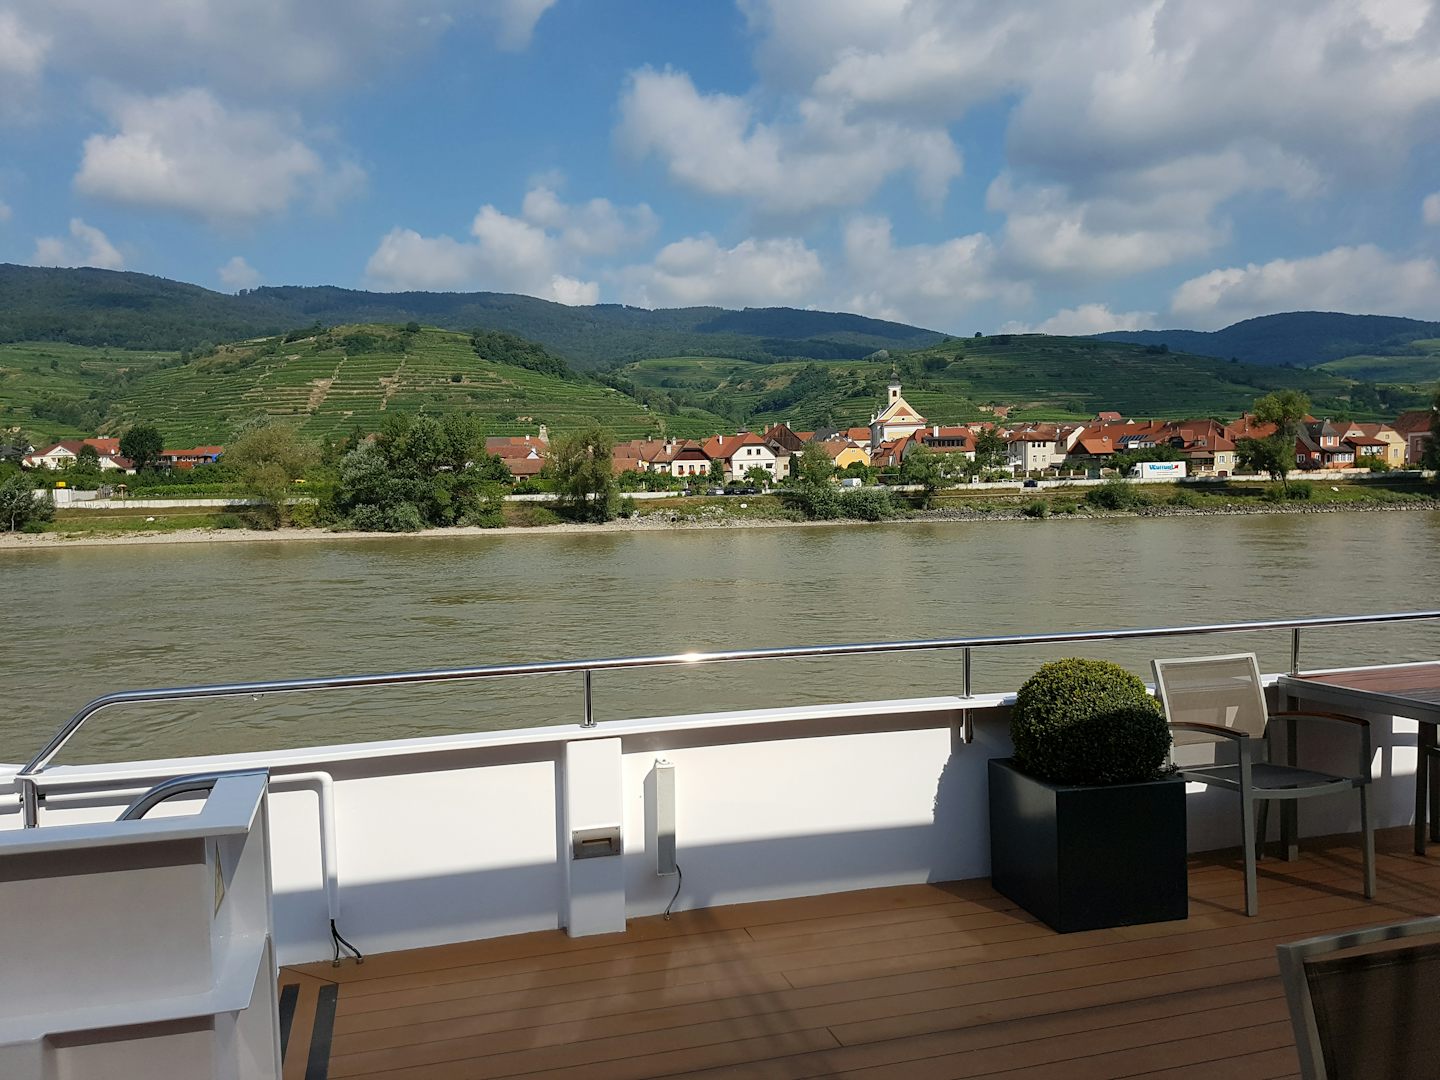 Typically serene outlook sailing on Rhine & Danube. Vessel, amenities, staff & 1st class touring exceeded all expectations. Added bonus of themed Wellness Cruise, together with daily instruction from yoga professional Connie, gave new meaning to fitness & flexibility for all ages. Highly recommend.